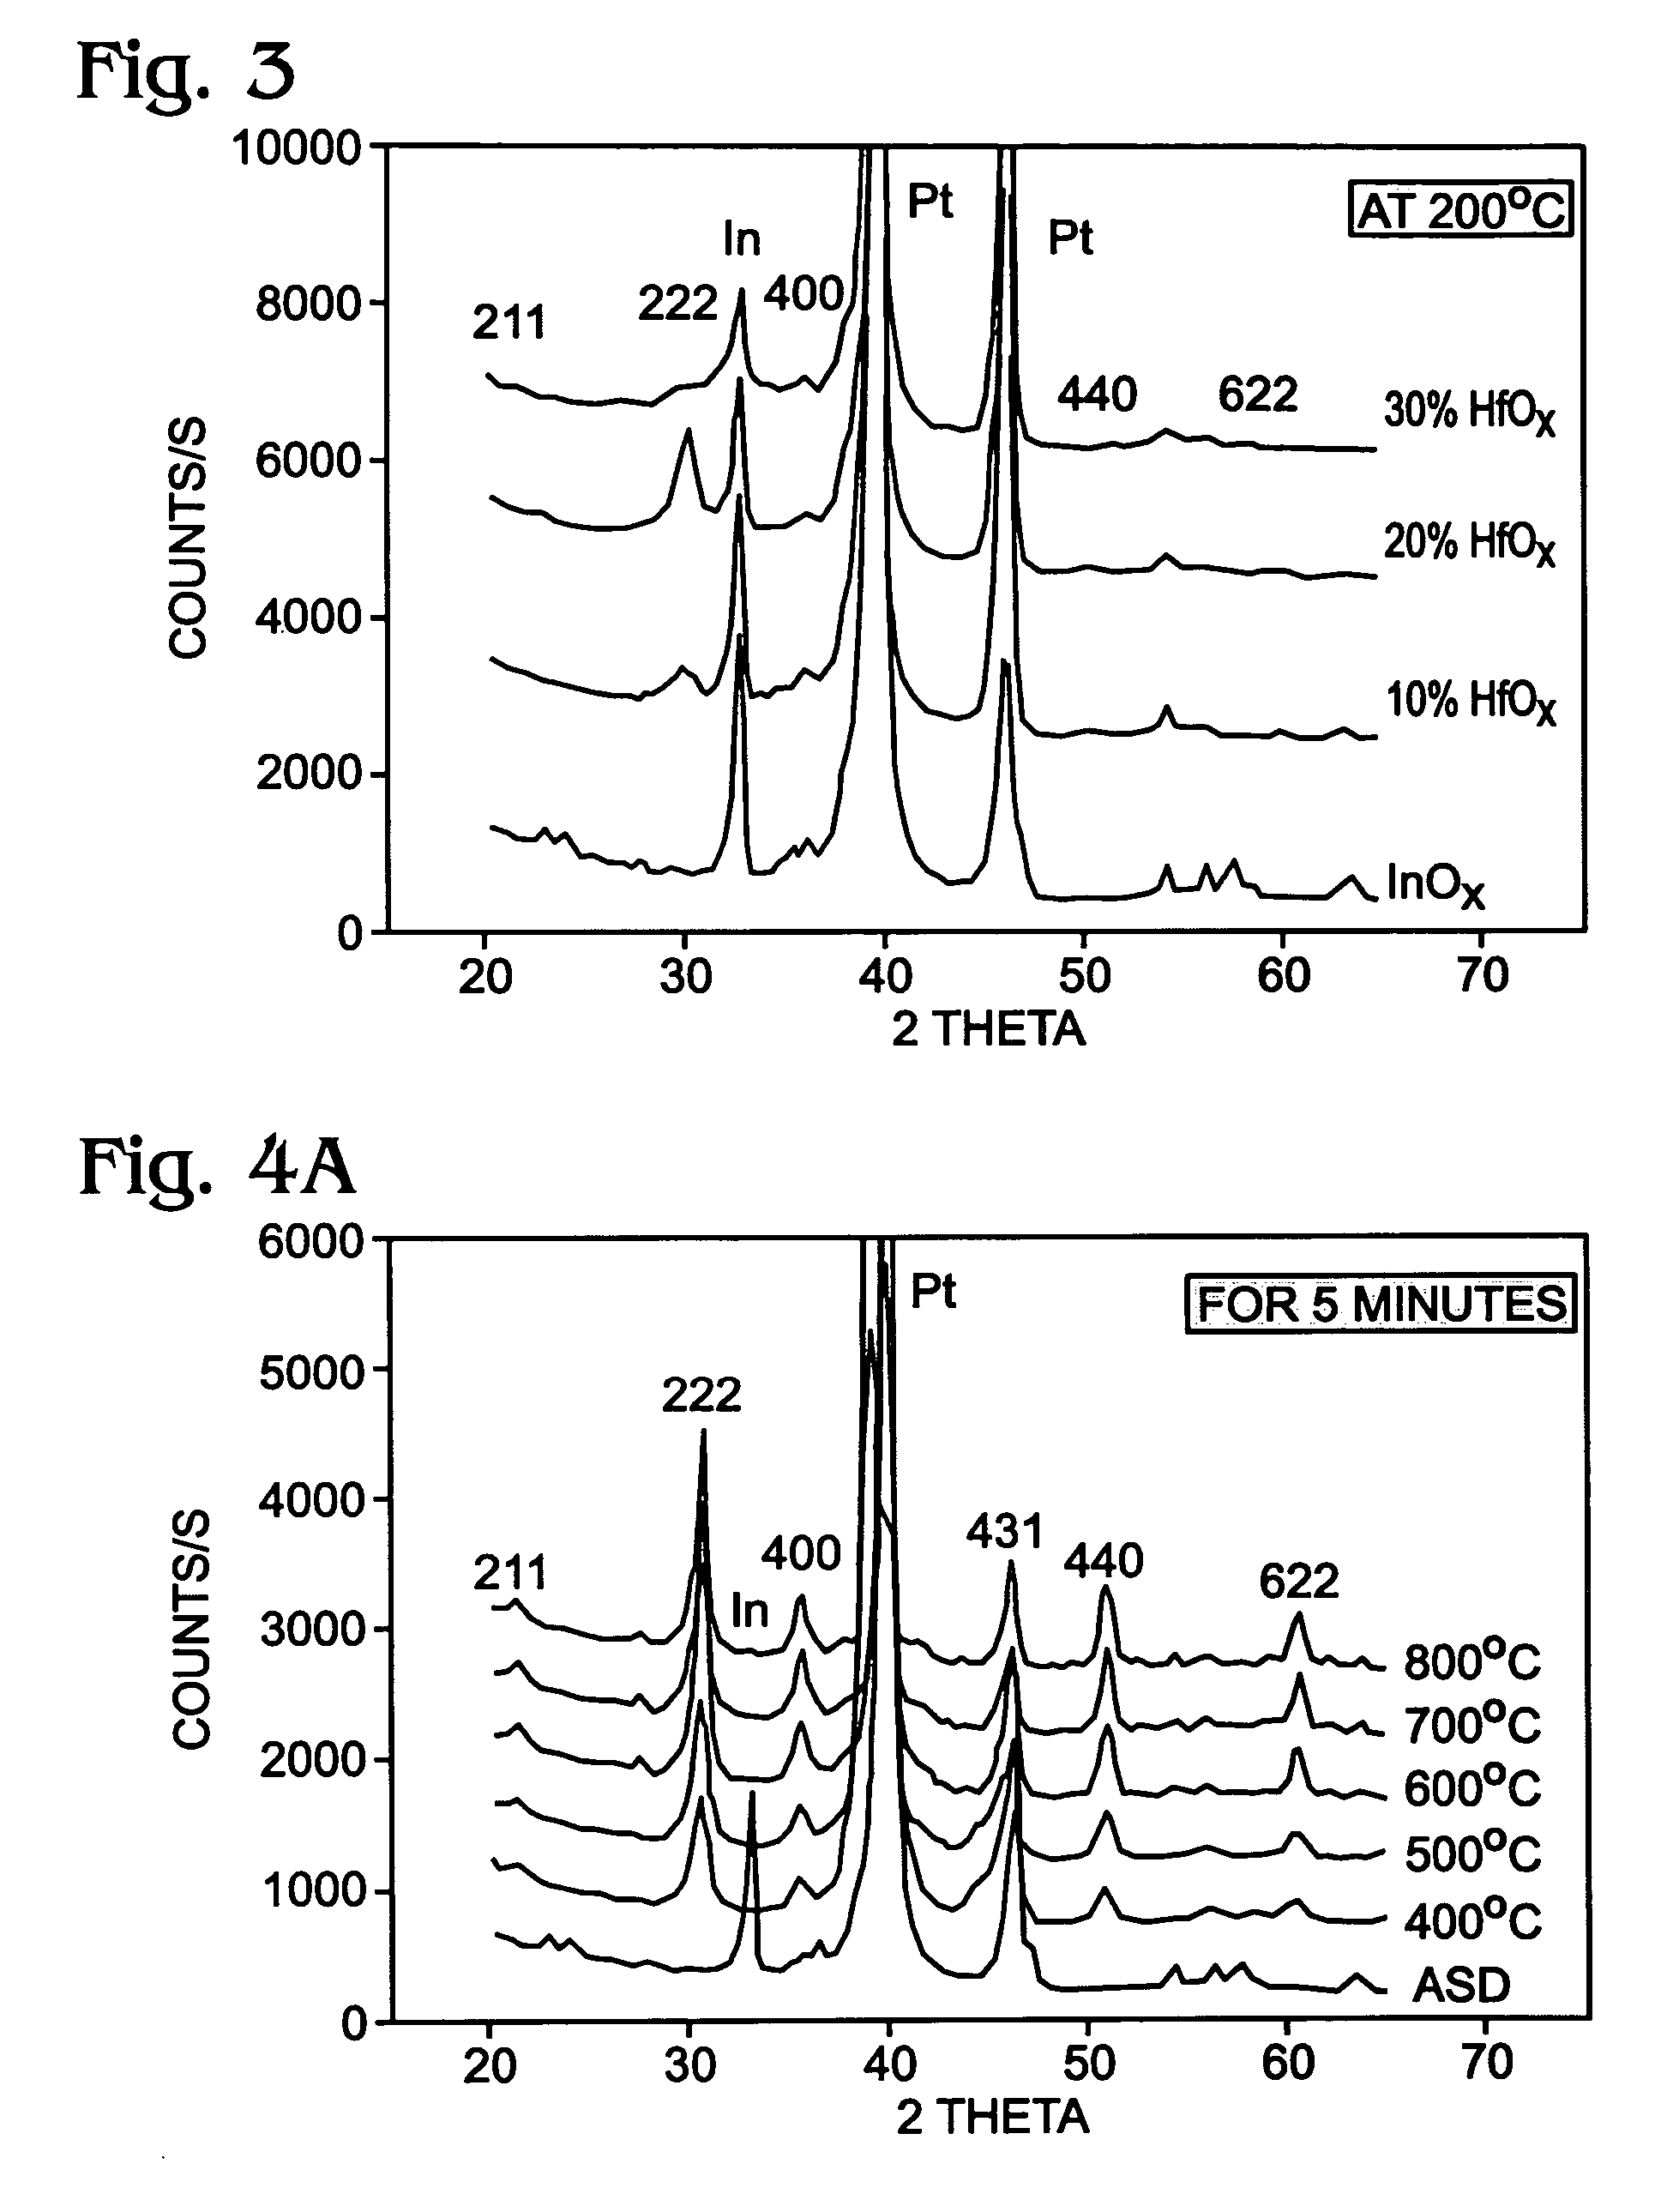 Ferroelectric transistor gate stack with resistance-modified conductive oxide